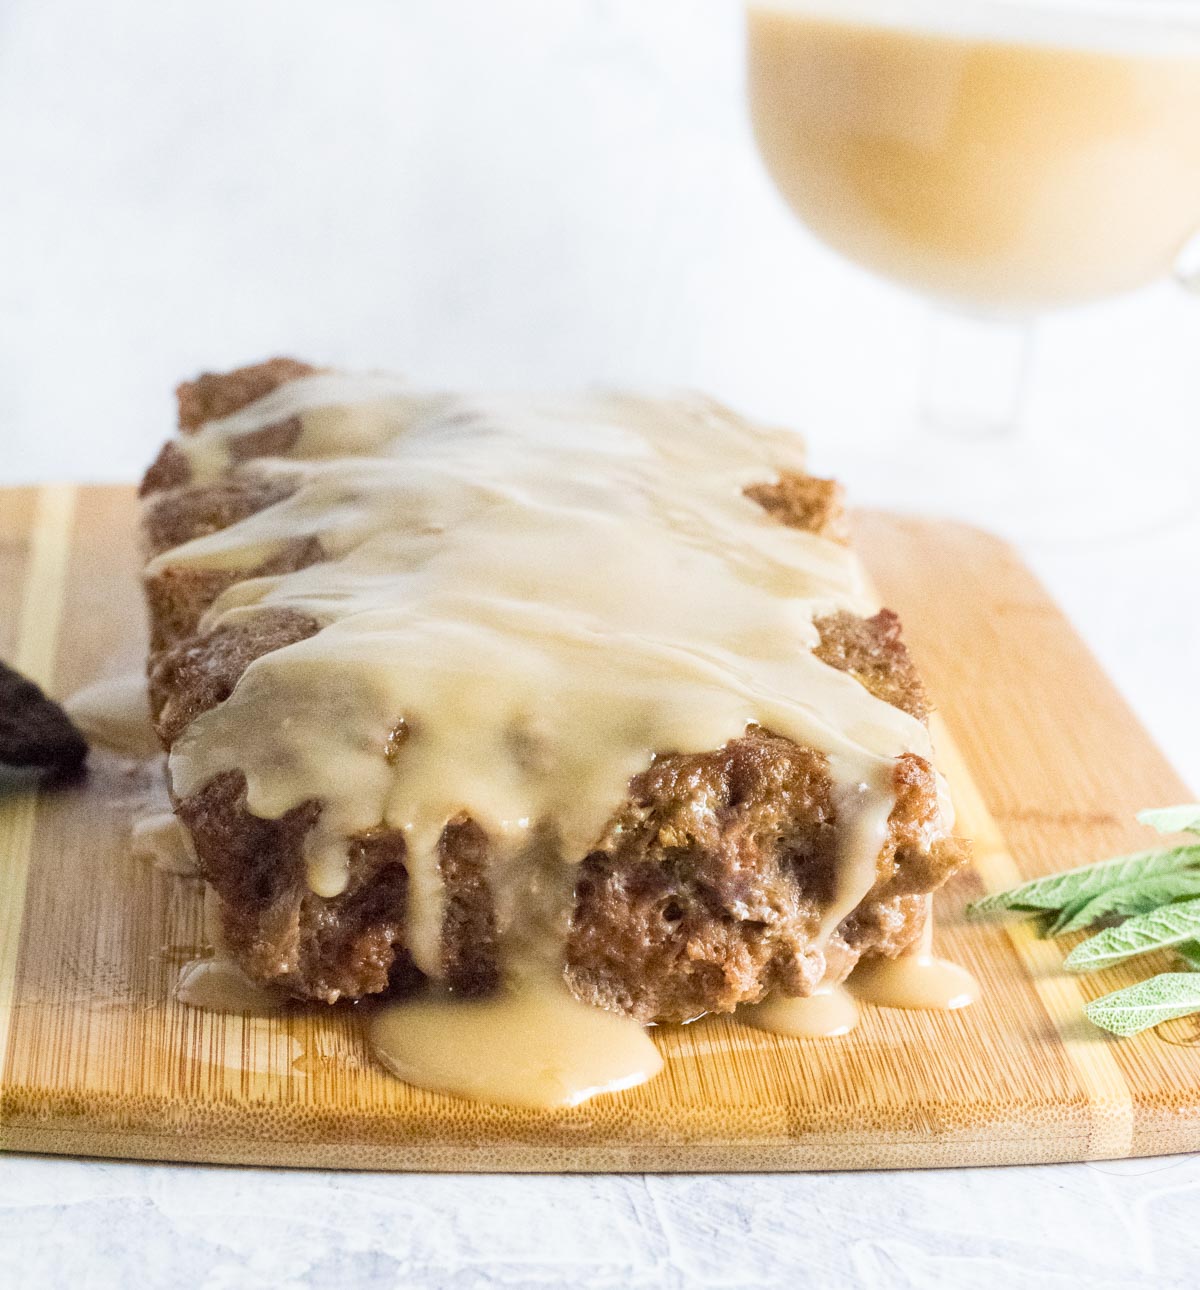 Meatloaf topped with brown gravy.